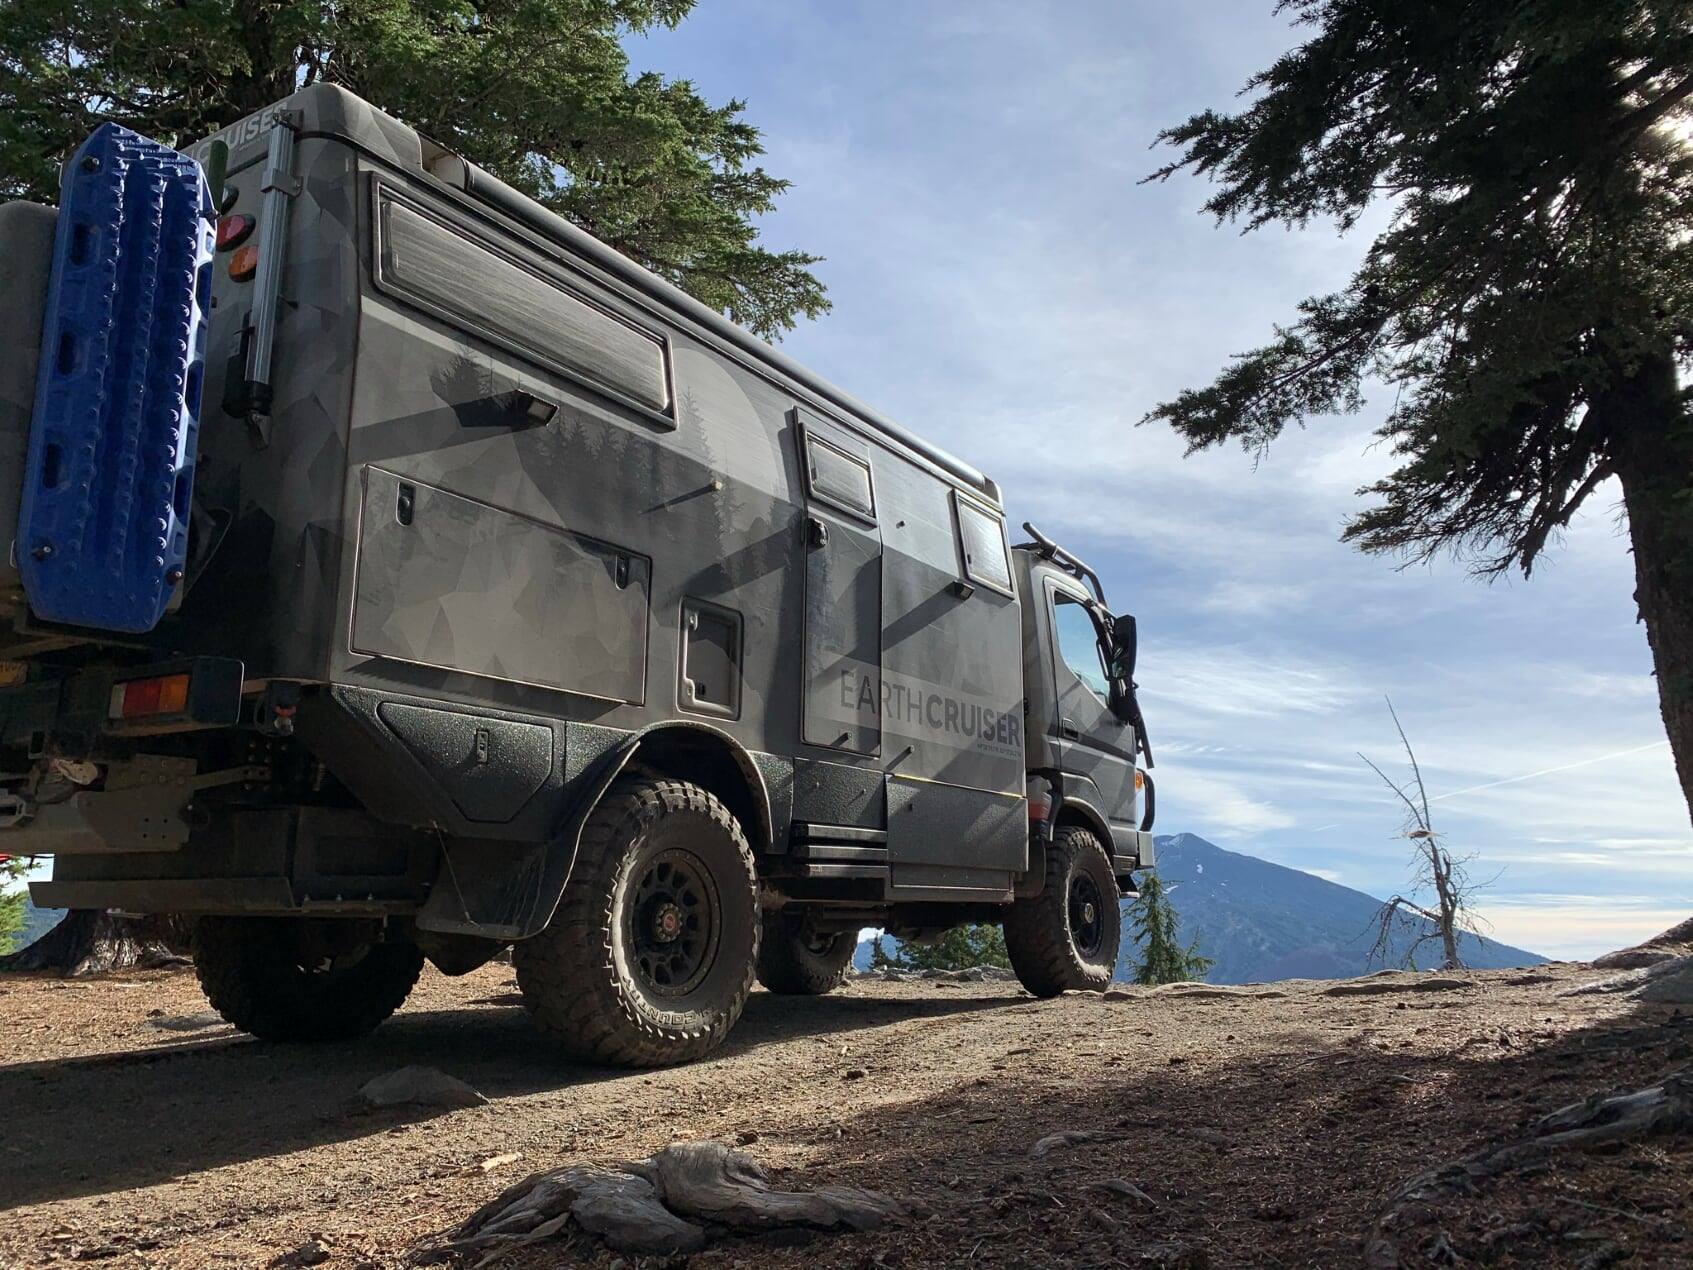 How Much is an EarthCruiser Overland Vehicle? - EarthCruiser Overland Vehicles